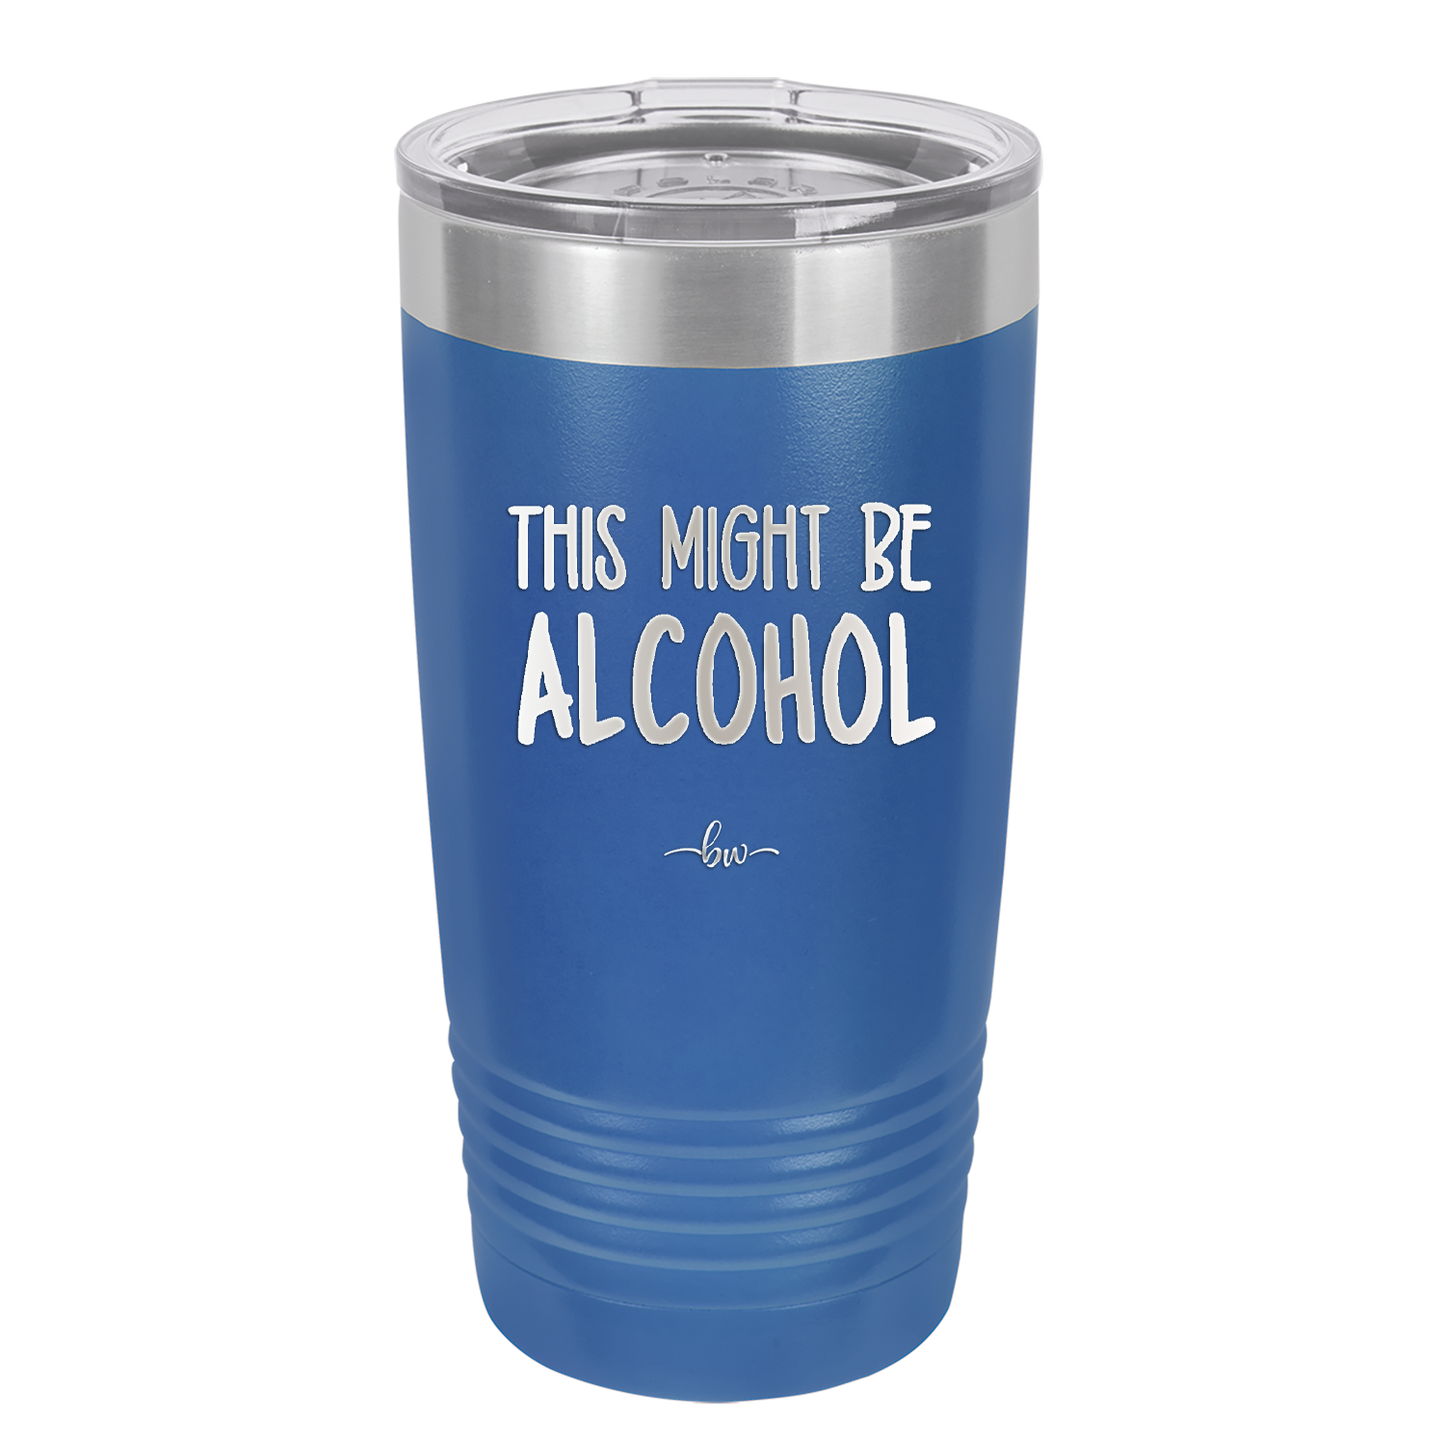 This Might Be Alcohol - Laser Engraved Stainless Steel Drinkware - 1001 -